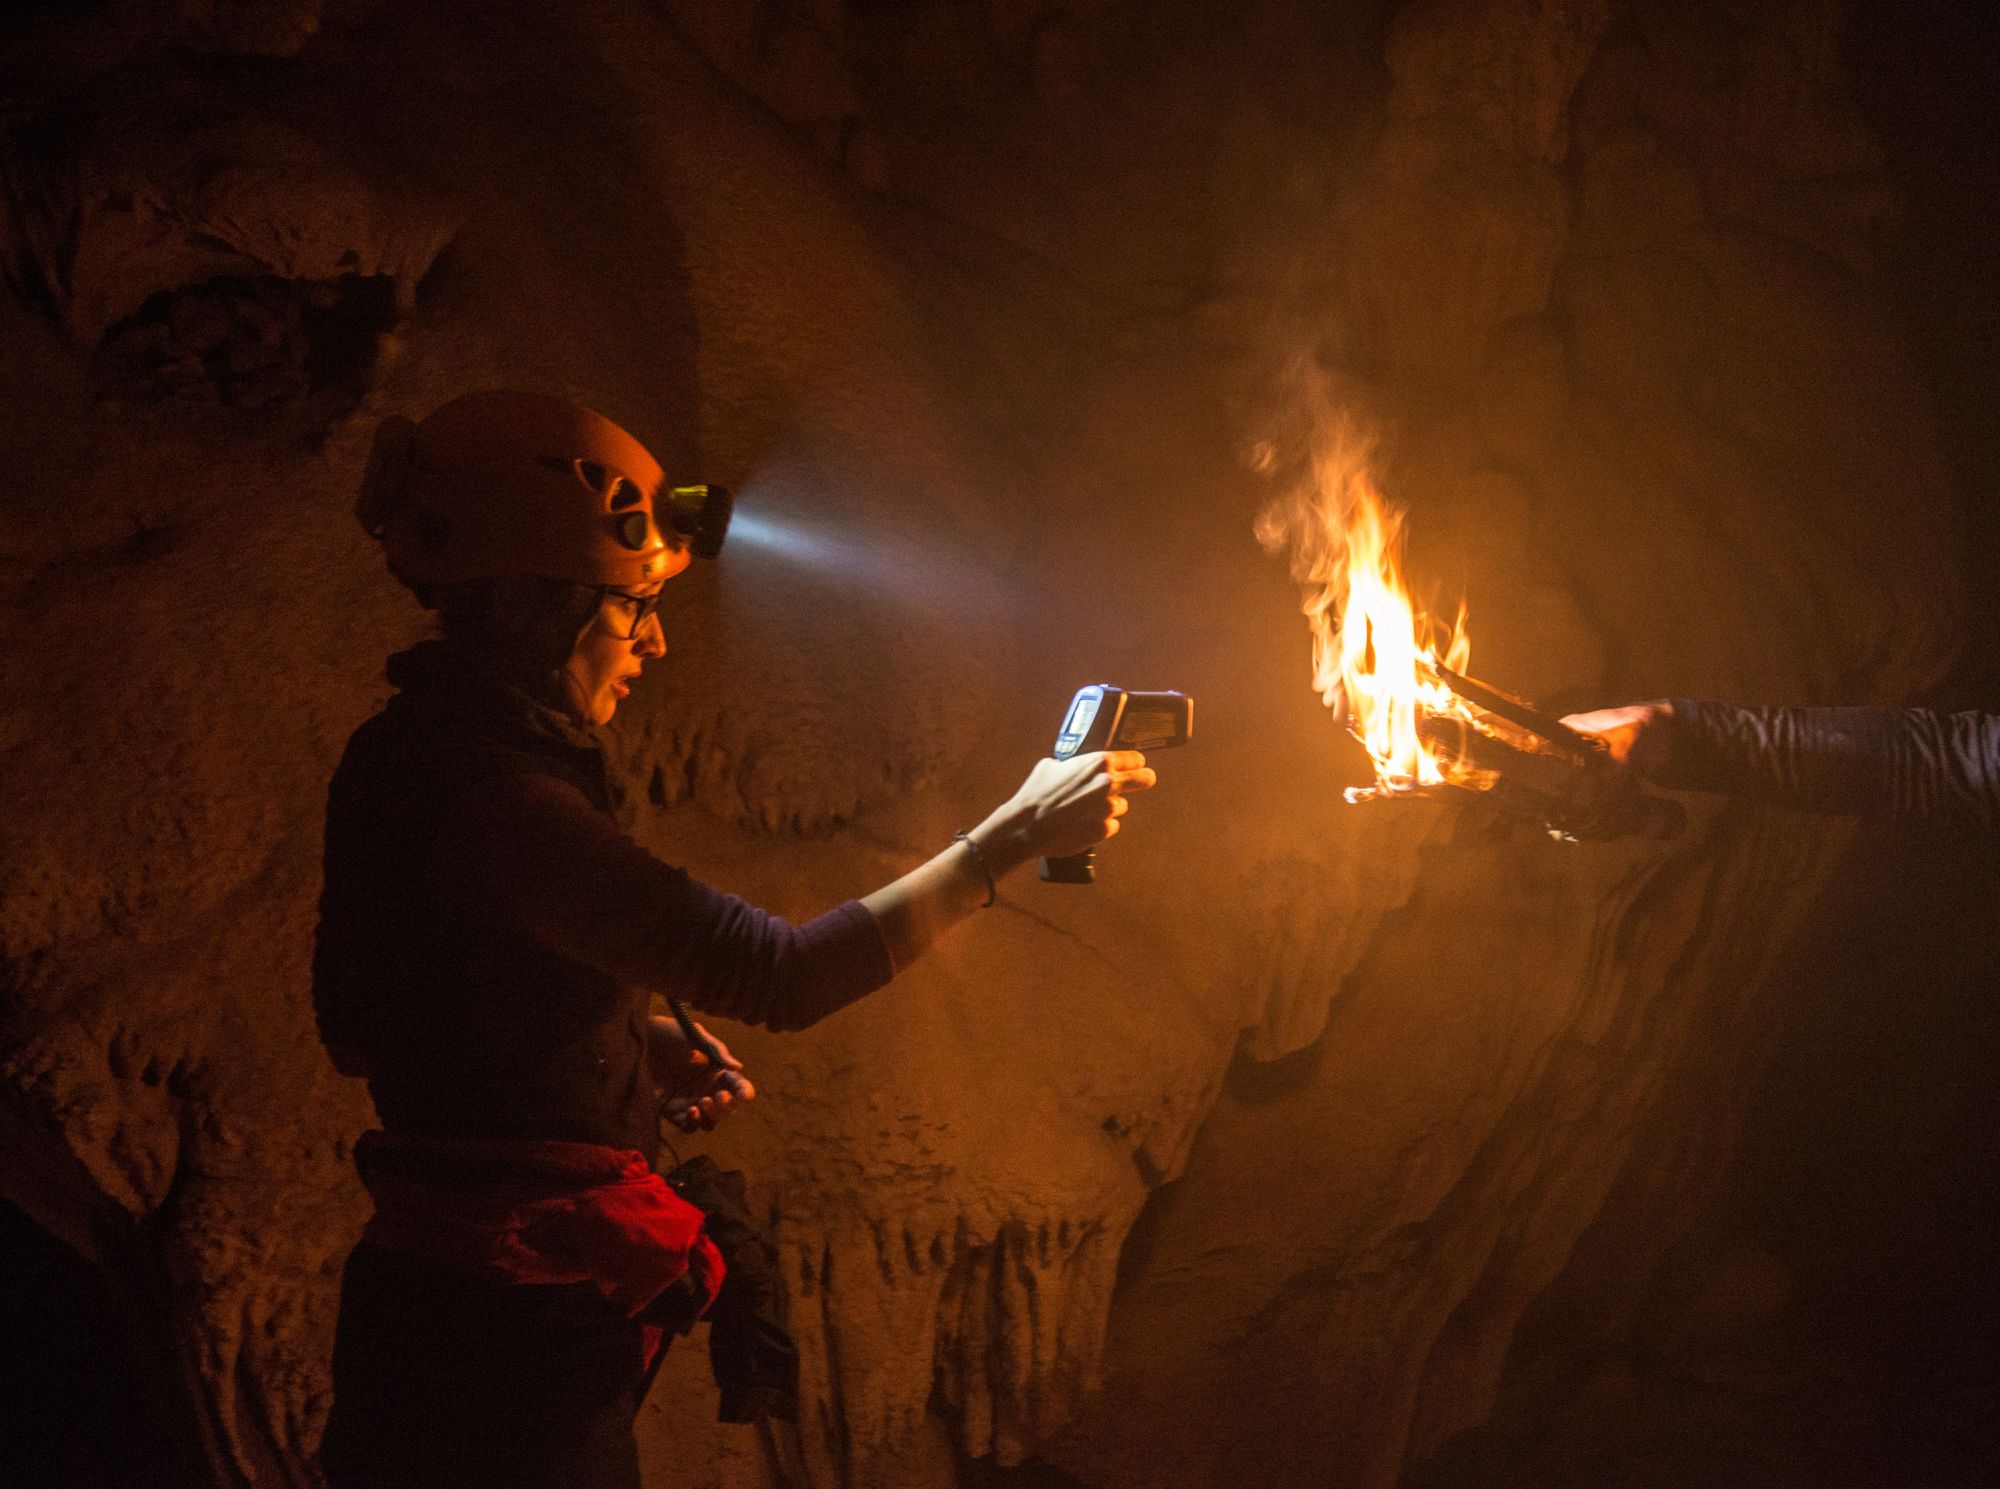 How torchlight, lamps and fire illuminated Stone Age cave art